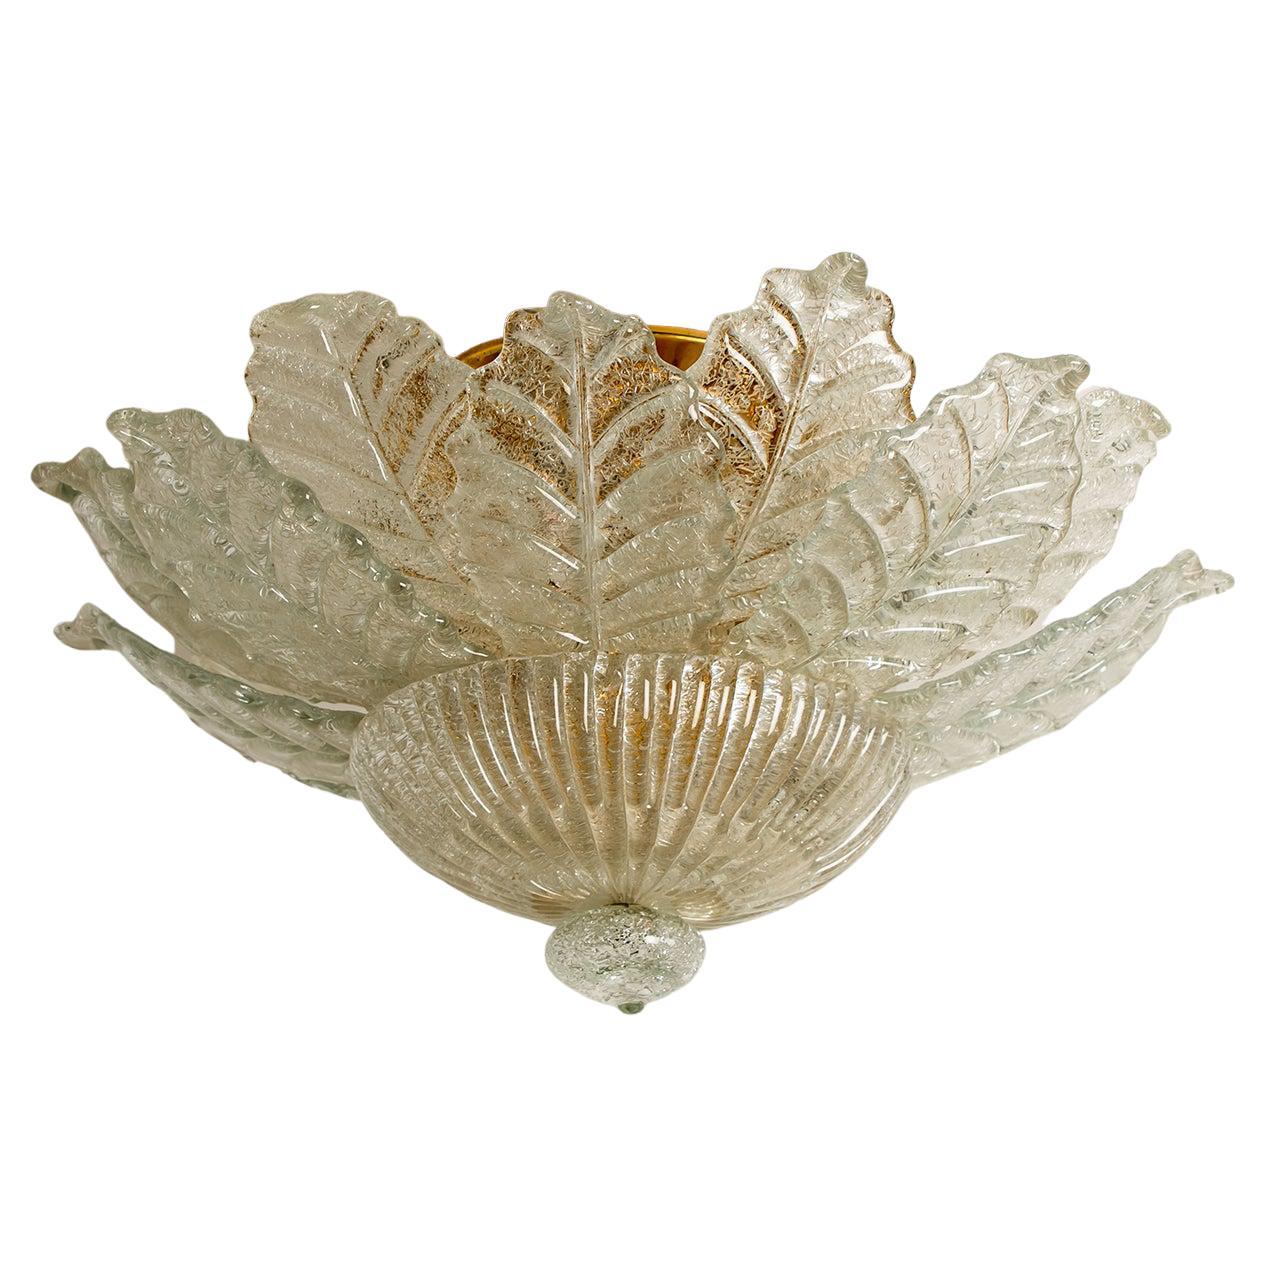 An elegant hand blown Murano glass flush Mount of Barovier & Toso. The light fixture consists 16 blown Murano glass leaves. Mounted on a brass frame. The leaves refract light beautifully. The flush mount fills the room with a soft, warm and